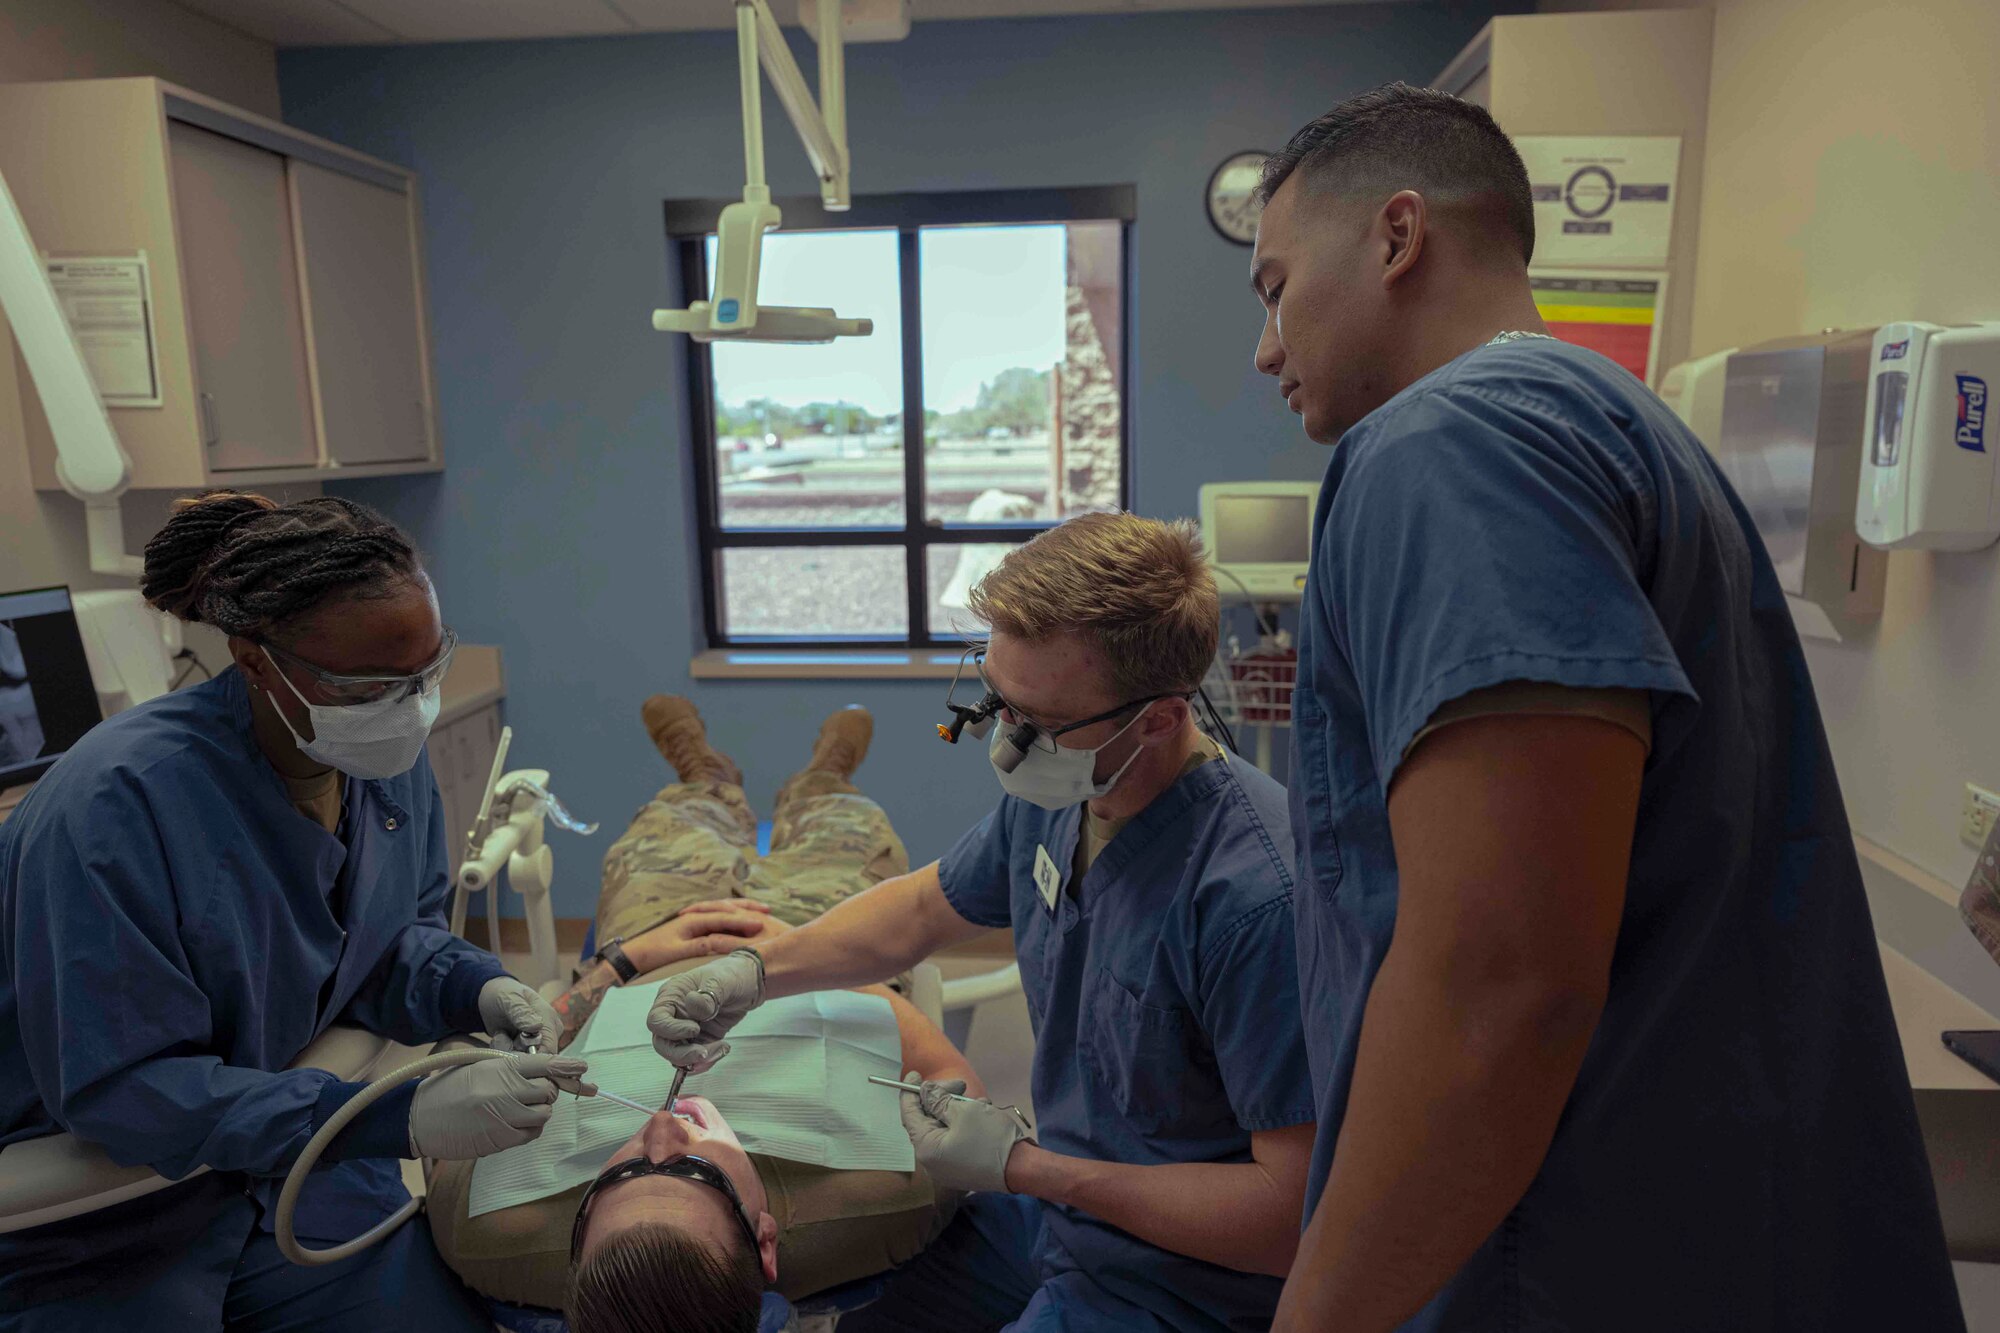 U.S. Air Force Tech. Sgt. Iokepa Garcia, 54th Fighter Group unit training manager, right, observes a dental procedure during a job swap event at Holloman Air Force Base, New Mexico, April 27, 2023. The purpose of the event was for Airmen to go out and shadow other career fields. (U.S. Air Force photo by Senior Airman Antonio Salfran)